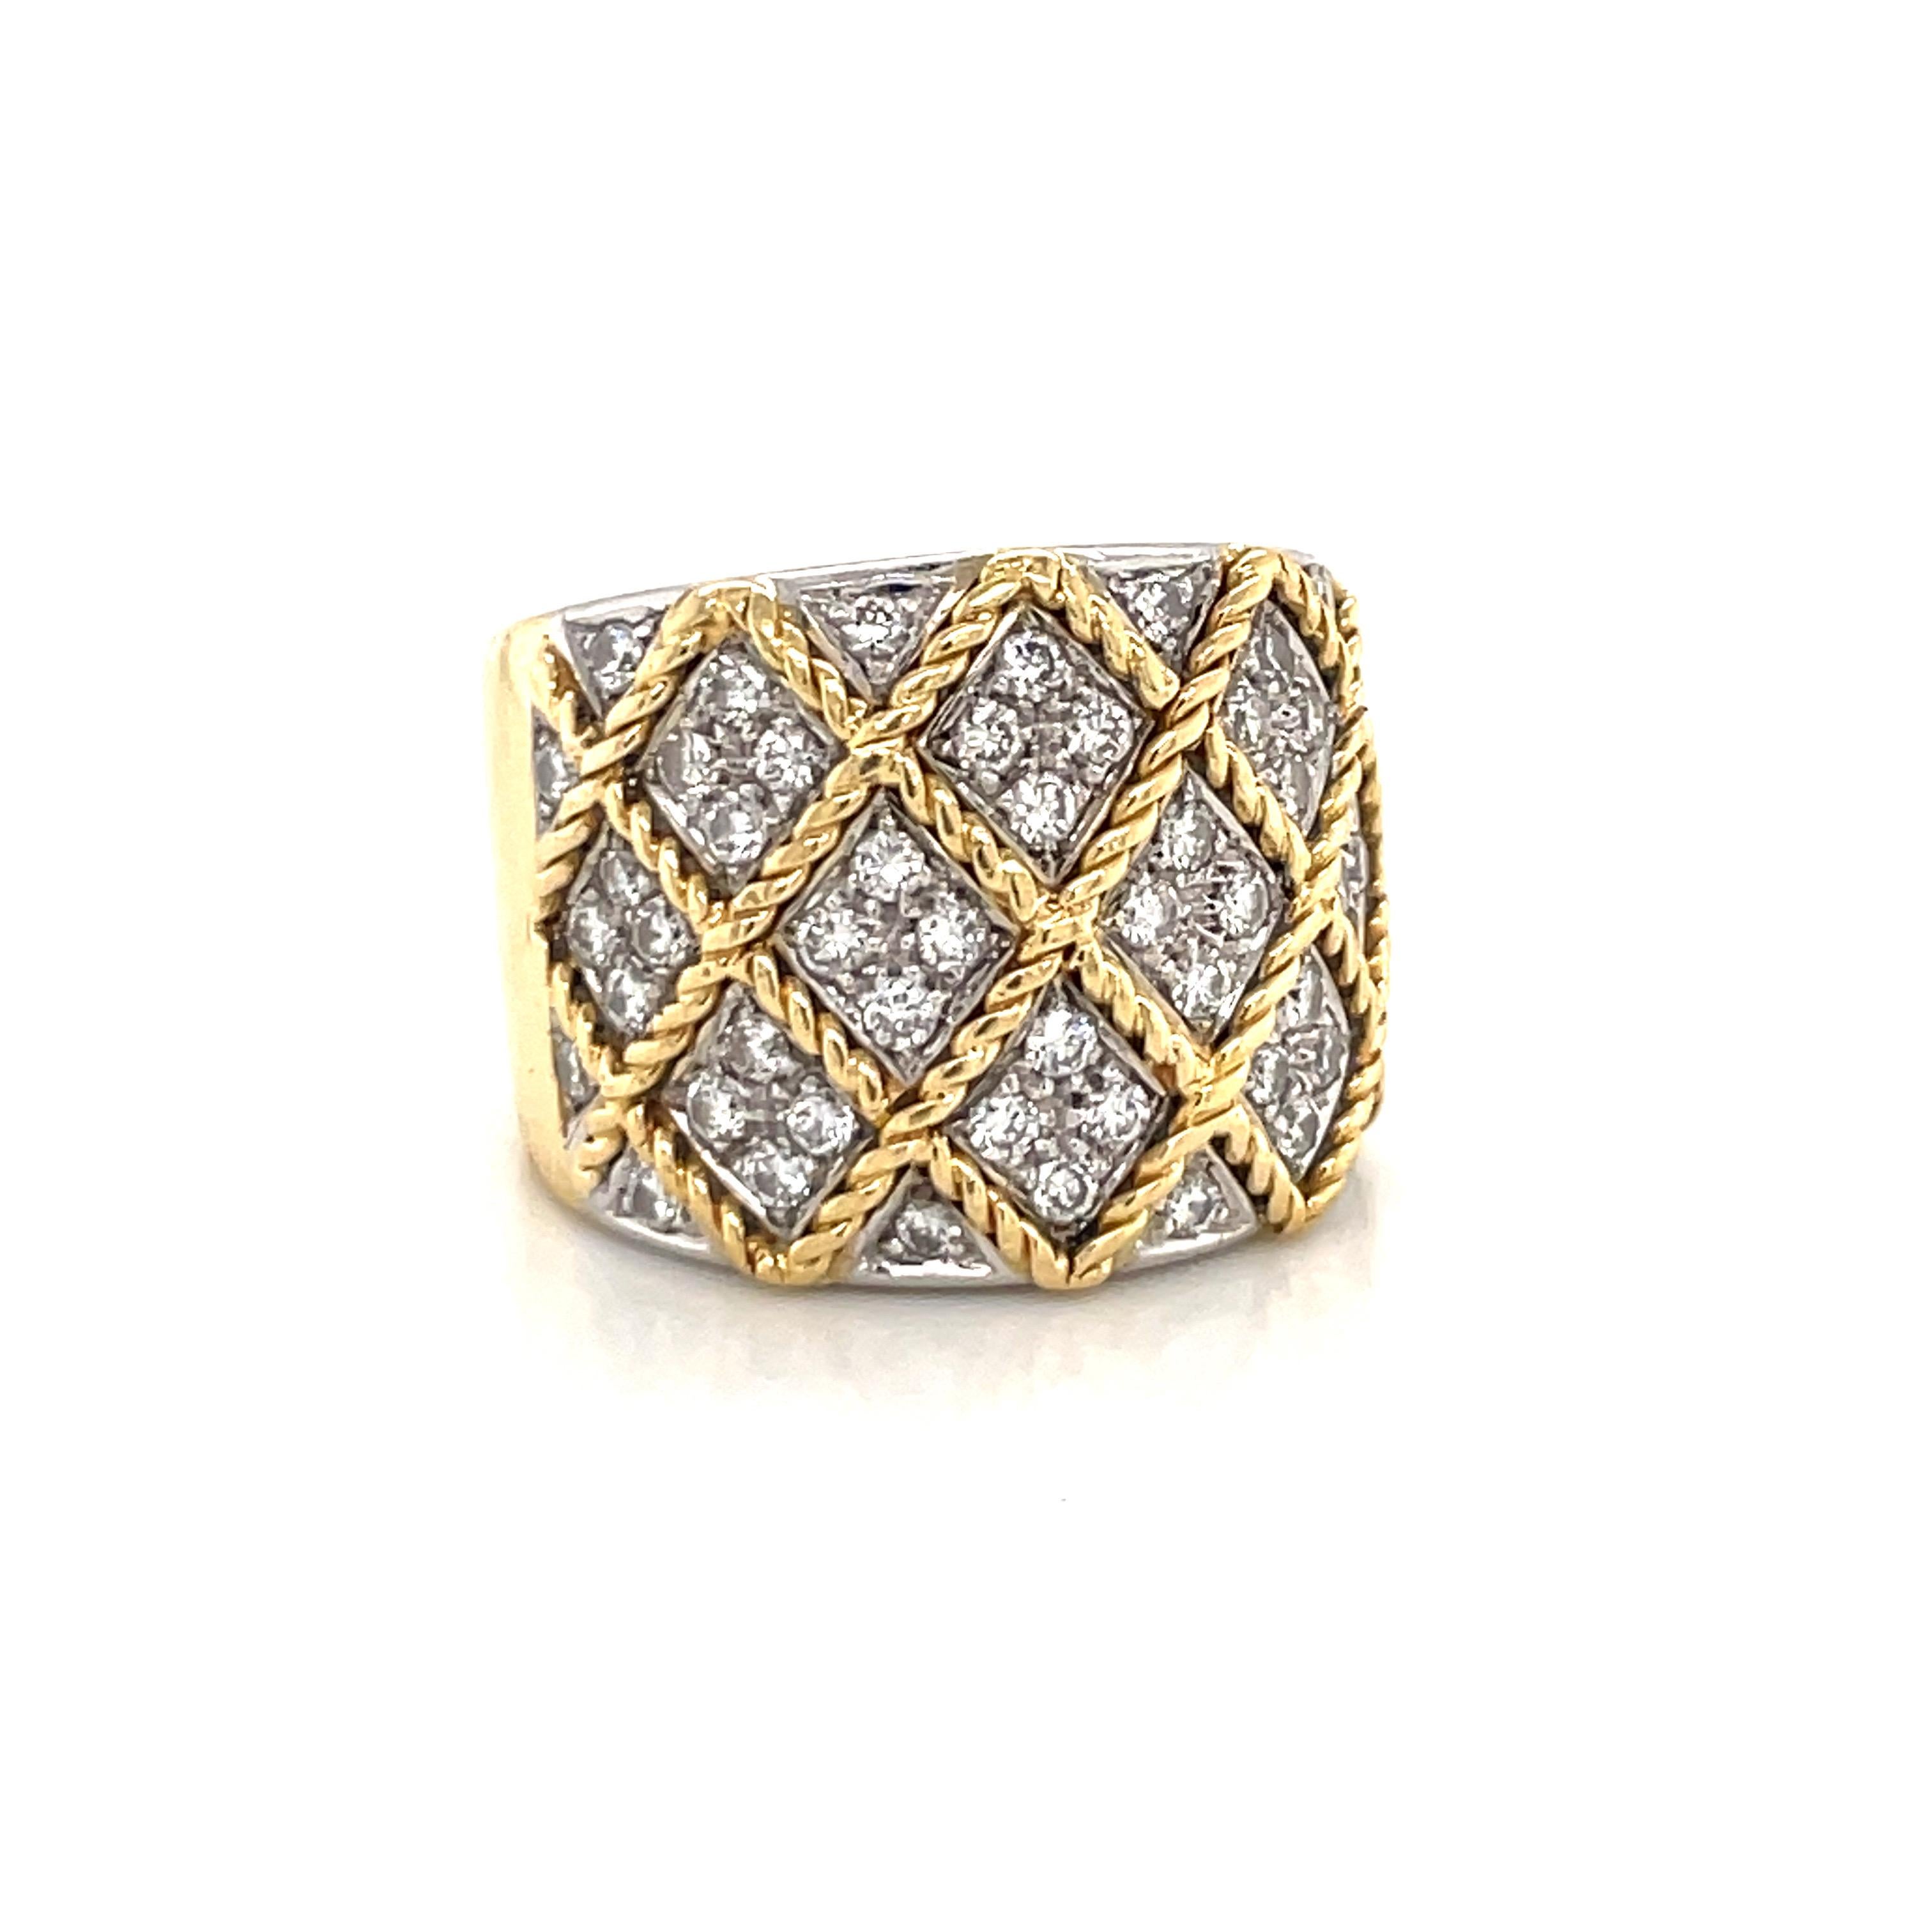 18 Karat Yellow gold wide ring featuring 52 round brilliants weighing 1.02 carats with a gold braided motif, 19.6 Grams.
Very Comfortable on the hand!